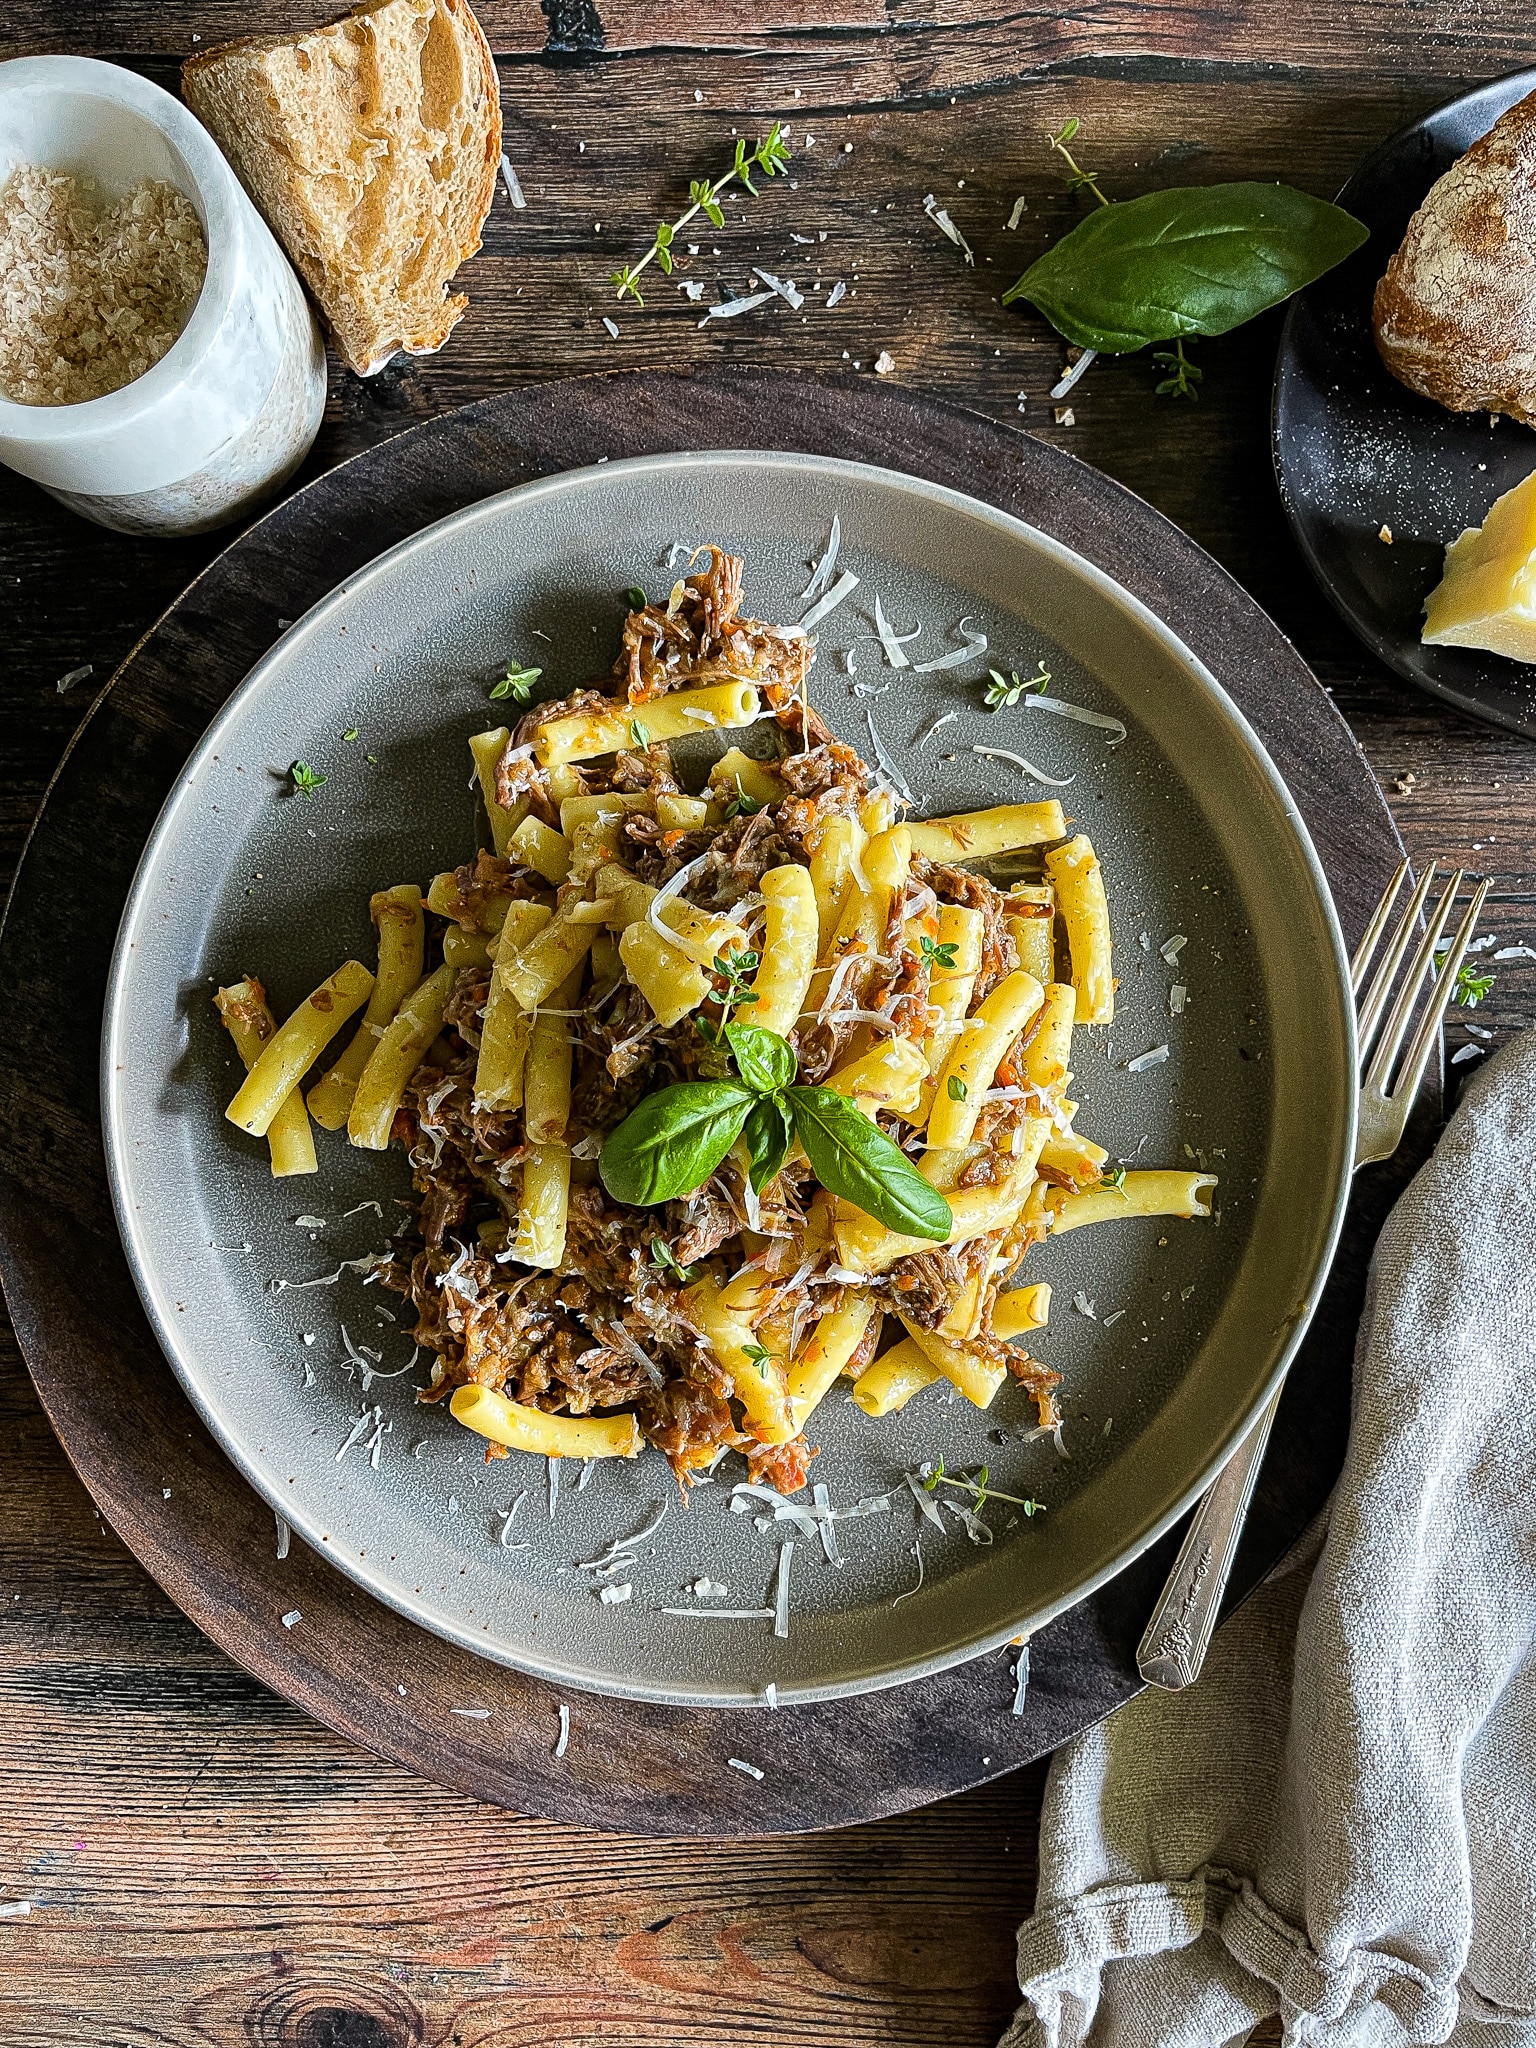 pasta alla genovese - an onion and beef ragù served on a plate from a dutch oven, garnished with parmesan cheese and fresh herbs